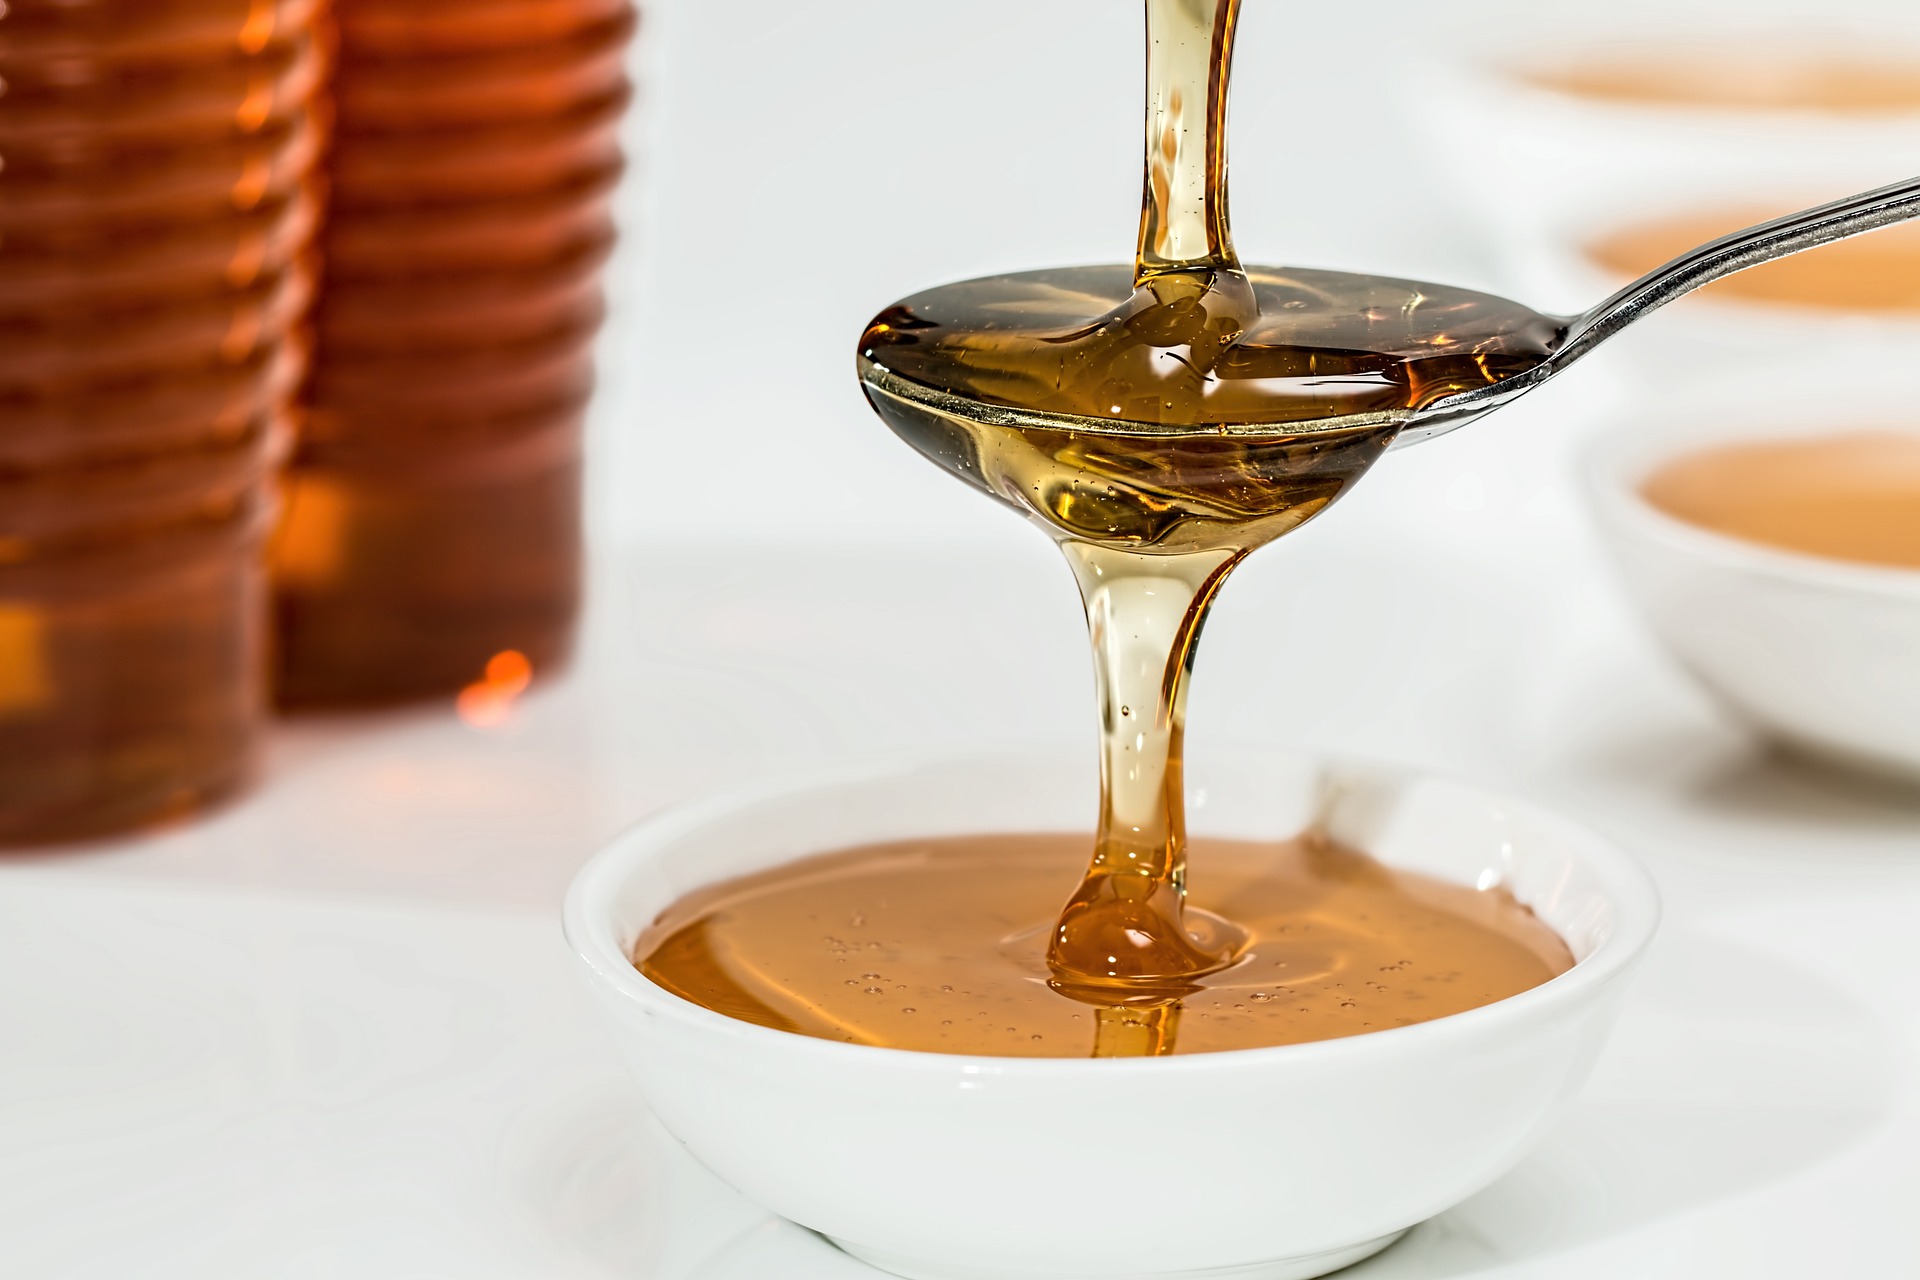 30 Research-based Health Benefits of Honey